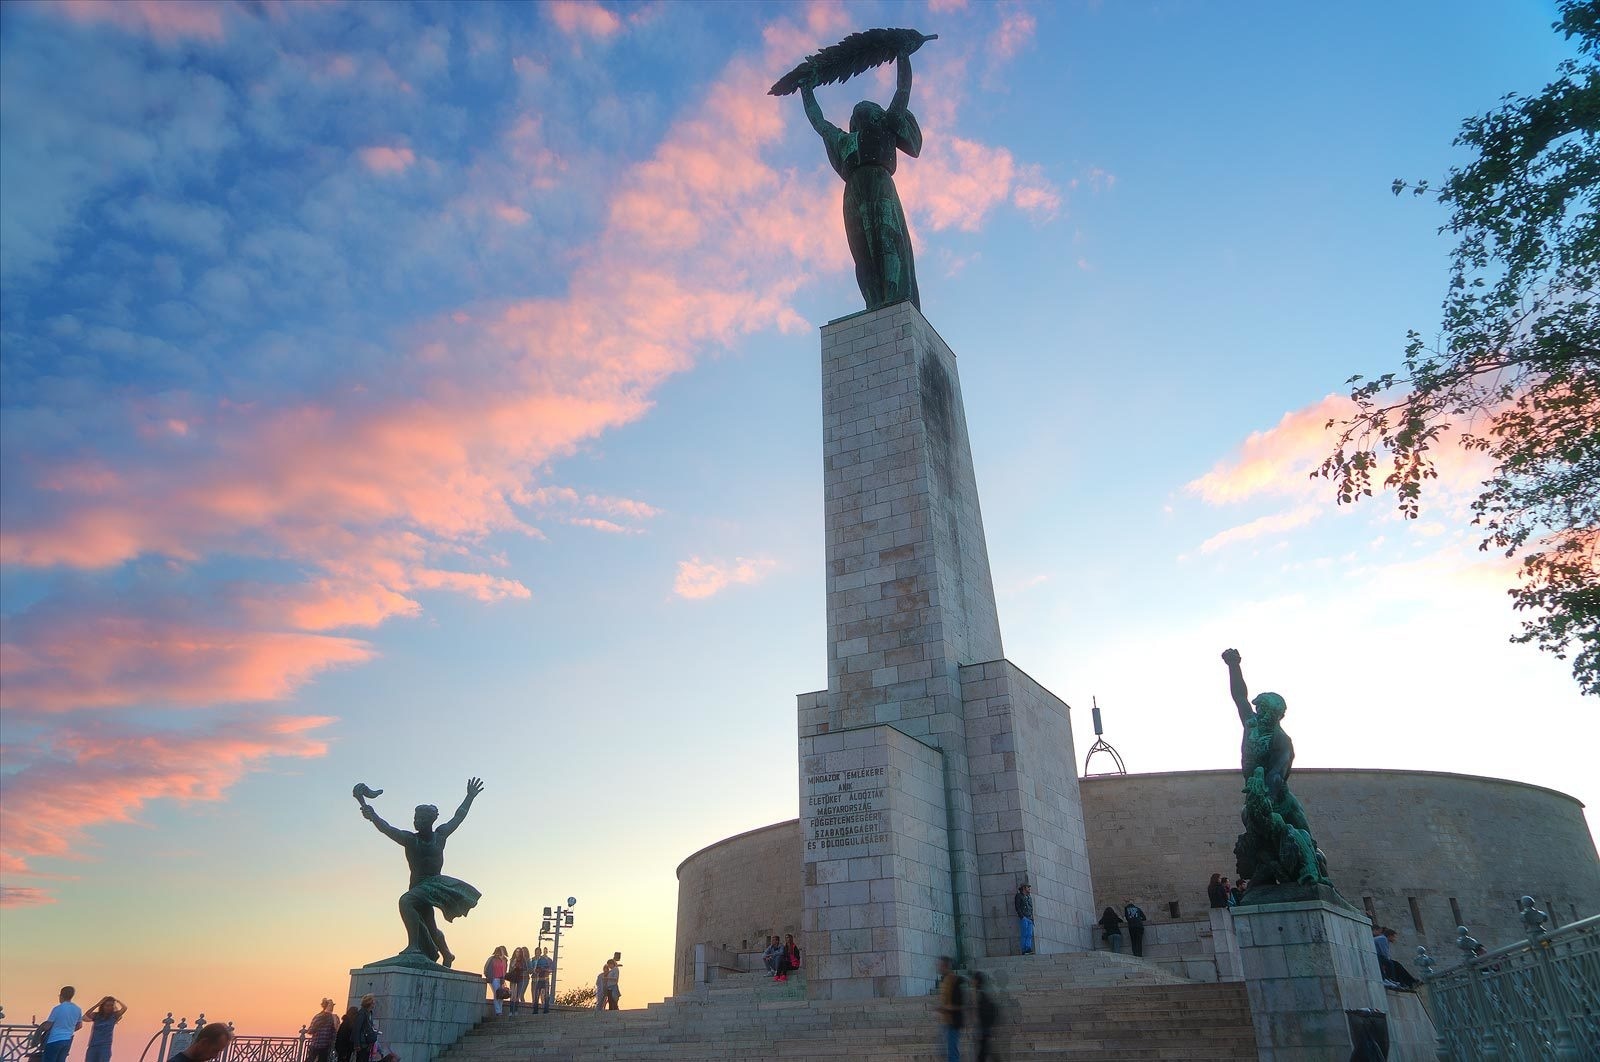 This is the communist era statue on Gellert hill.

https://www.alwayswanderlust.com/cool-fun-things-to-do-in-budapest/